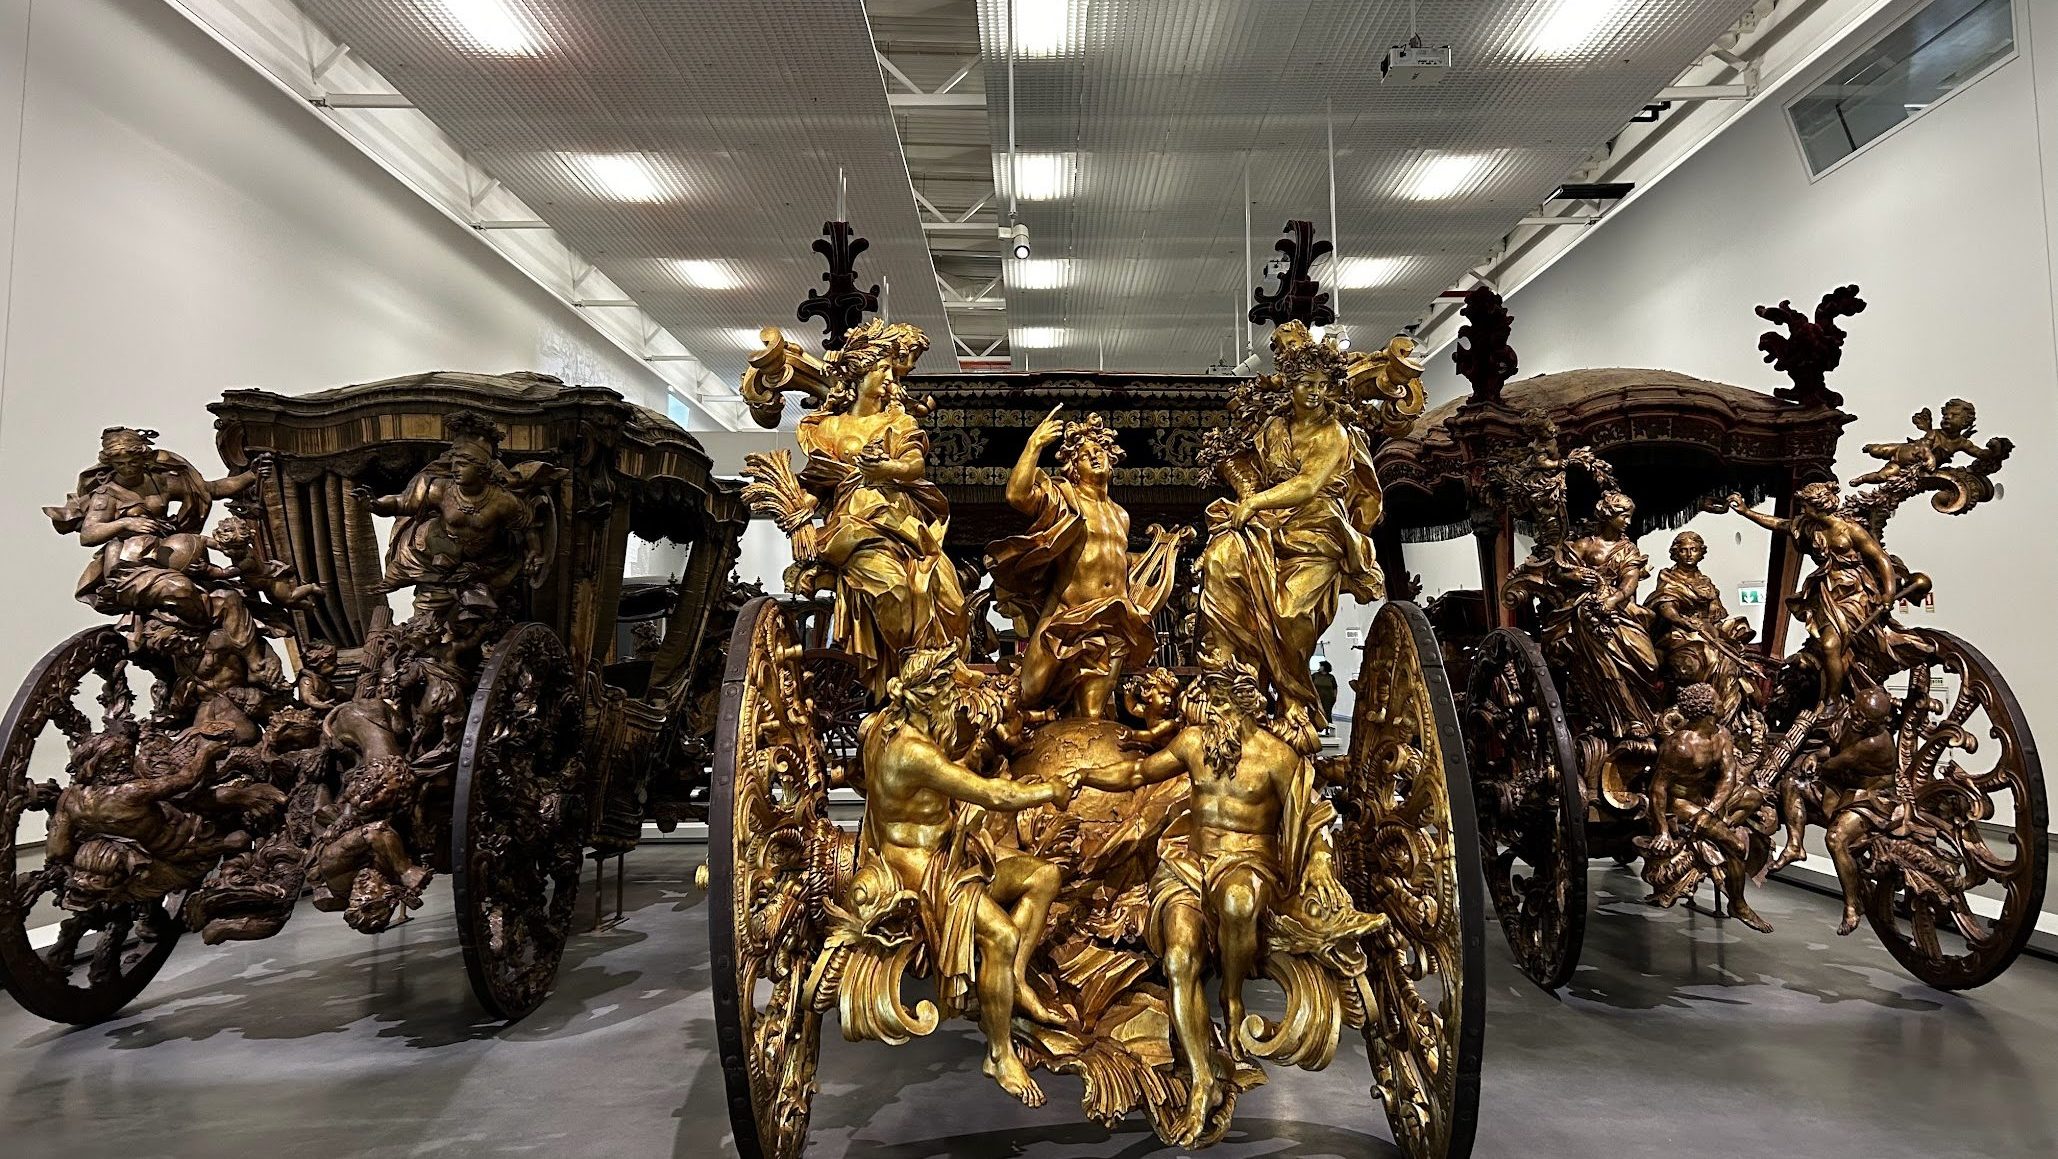 g]Golden carriages in a museum